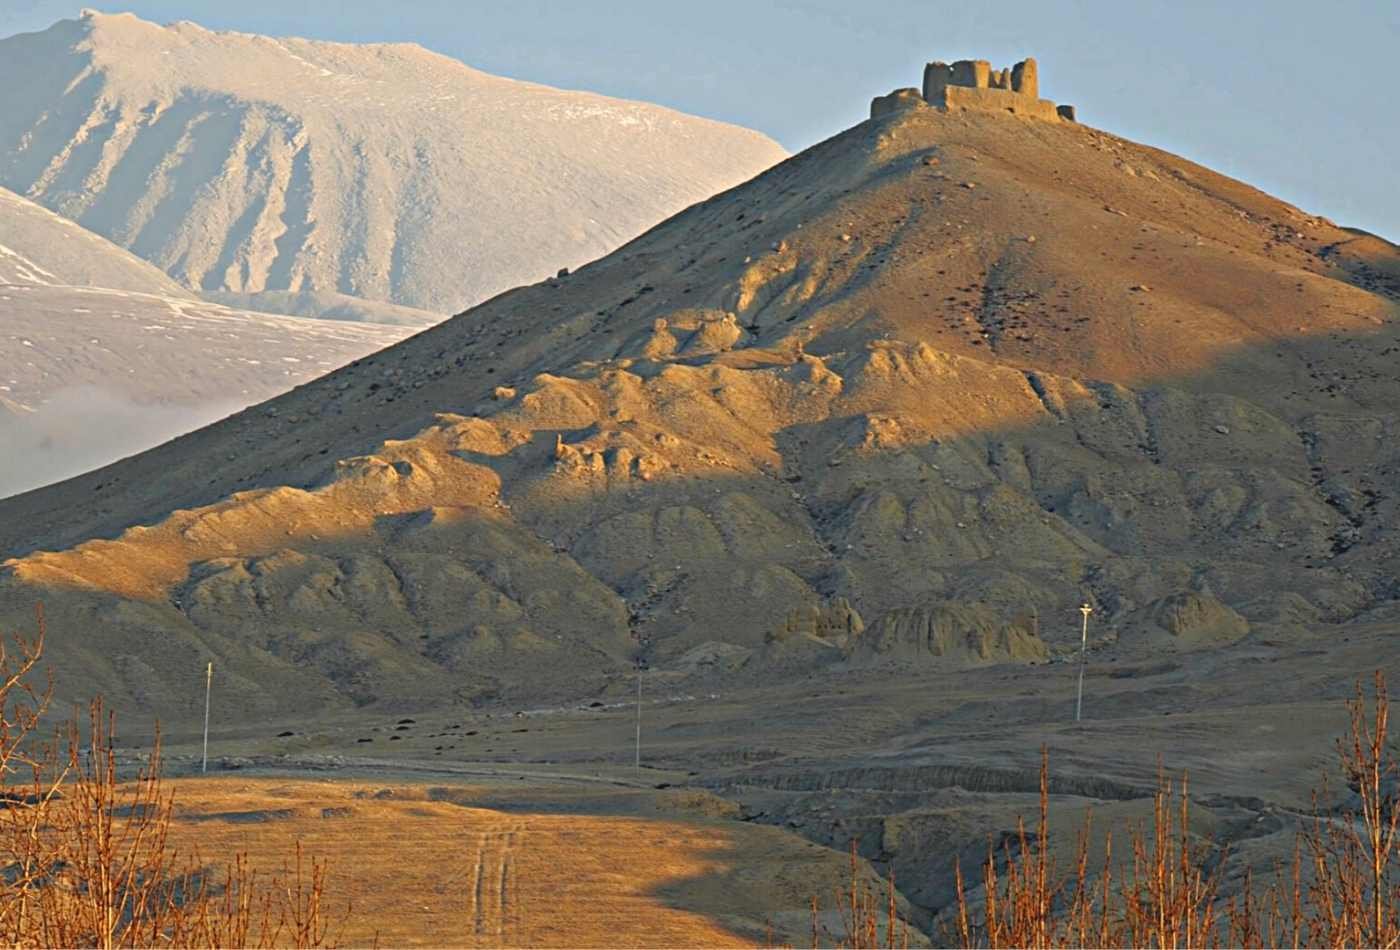 An ancient fortress perched atop a hill, basked in warm sunlight with a barren, arid landscape in the background in Upper Mustang. 